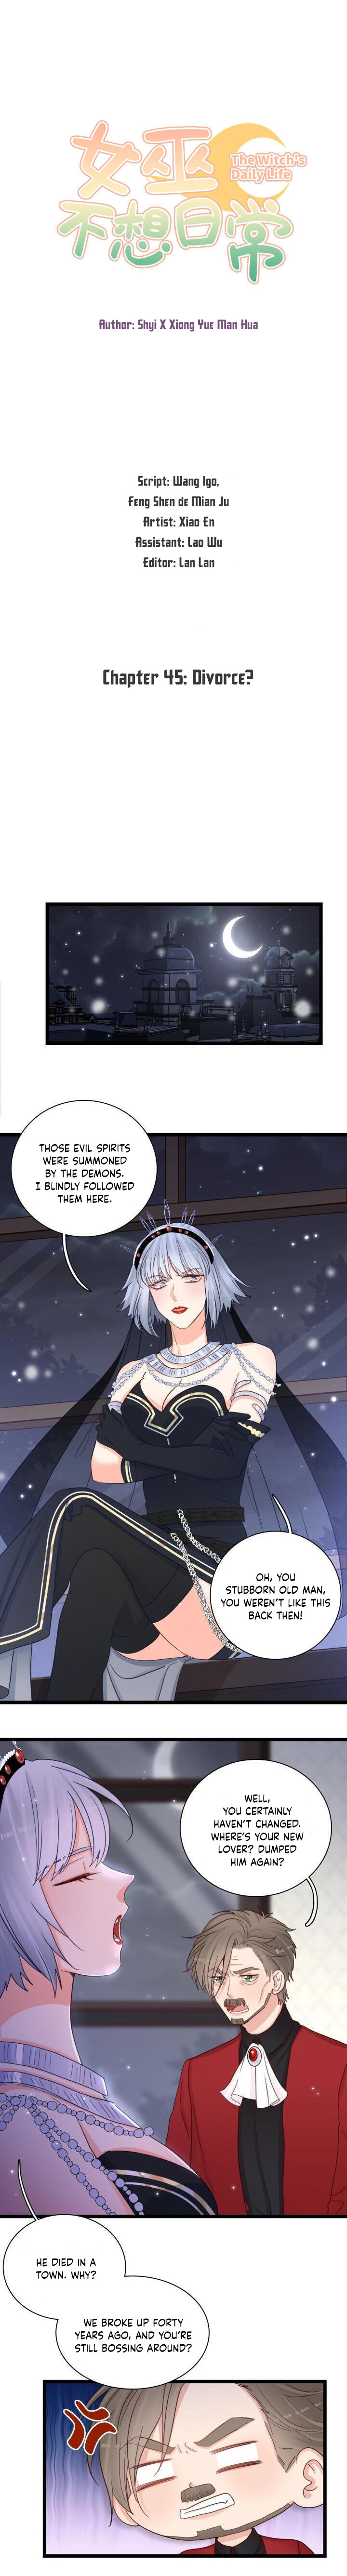 The Witch’S Daily Life Chapter 45: Divorce? - Picture 1